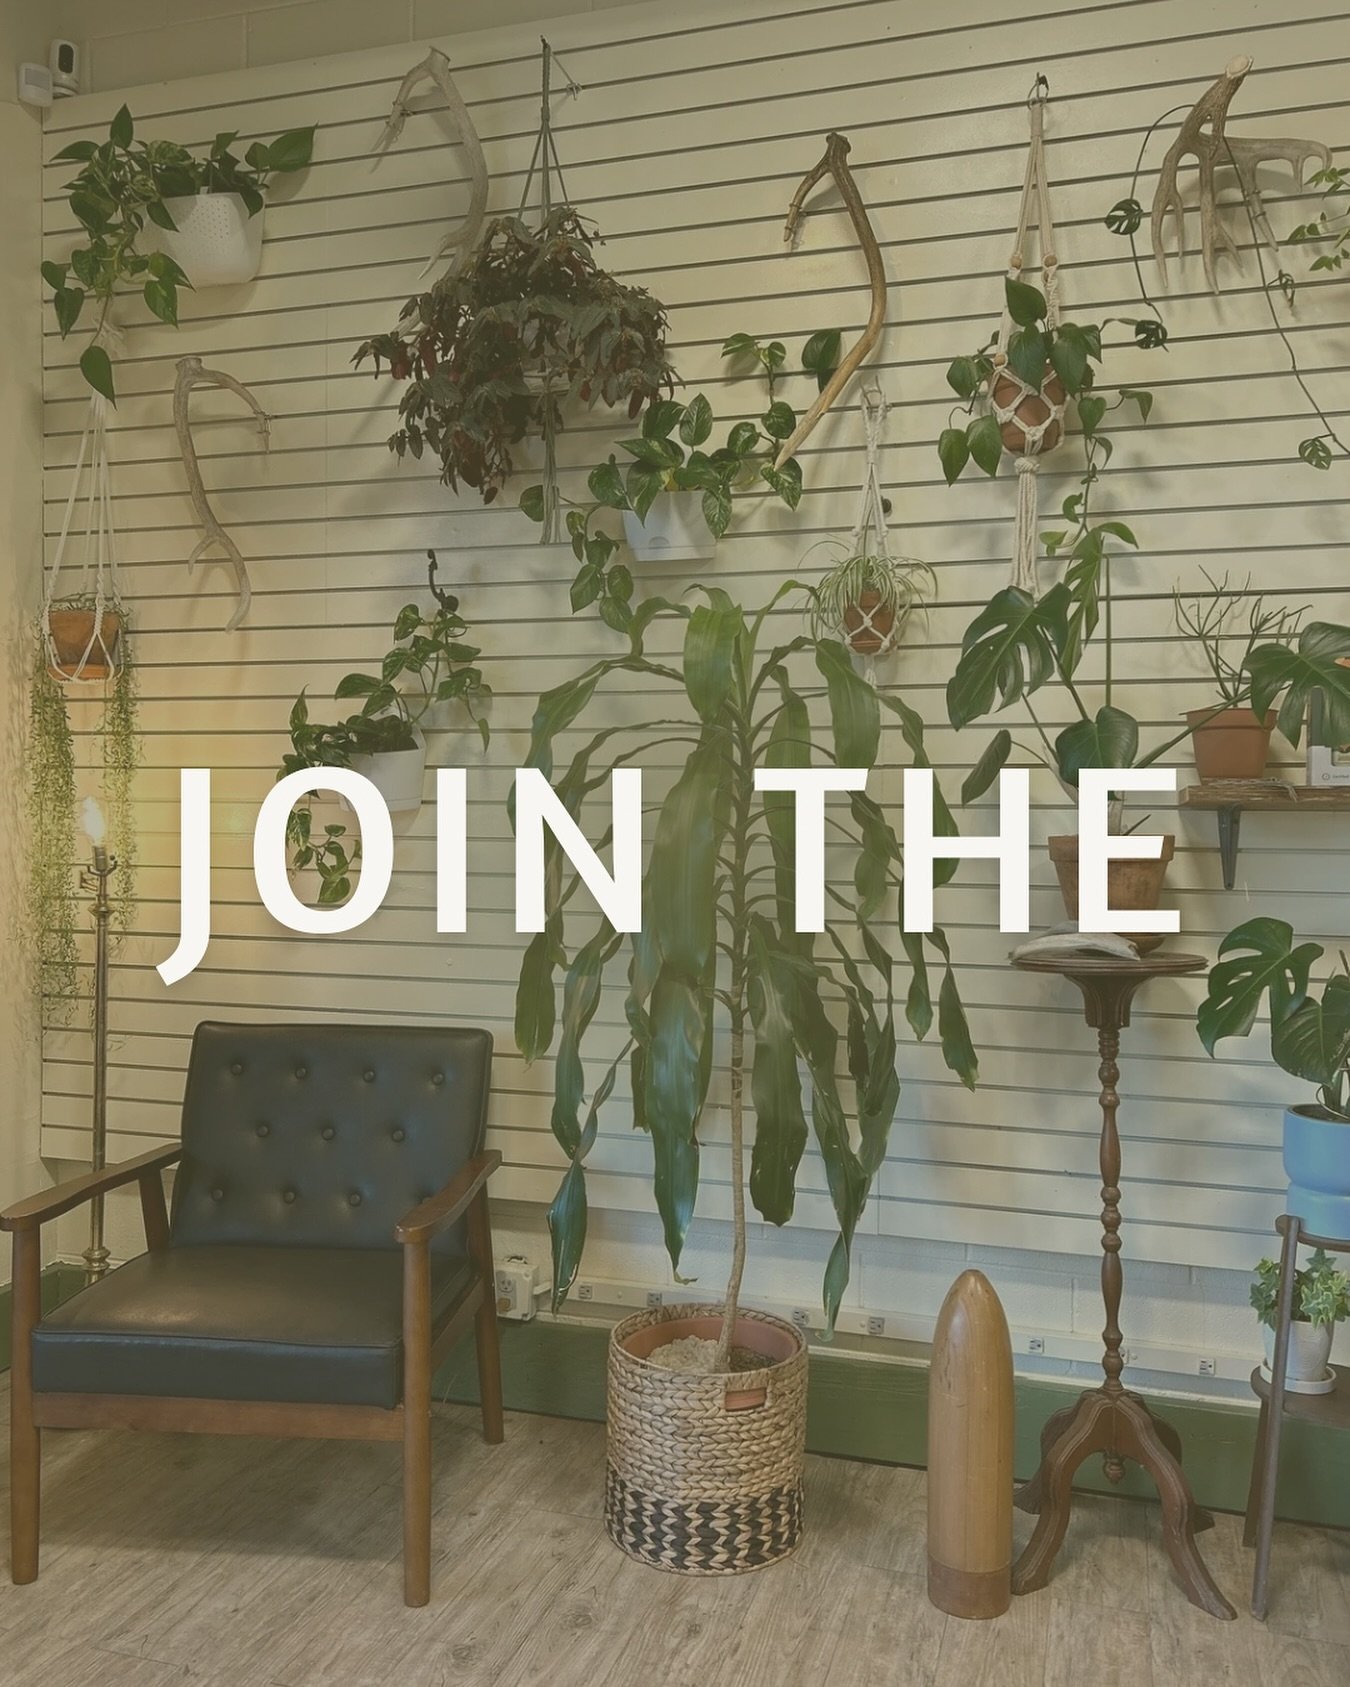 Calling all commission stylists and barbers ~ we are hiring!

OAK BRUSH was created in thought as a space for stylists to do what they love, with freedoms that restructure the salon norm ~ open your schedule as needed, take your time off, set your pr